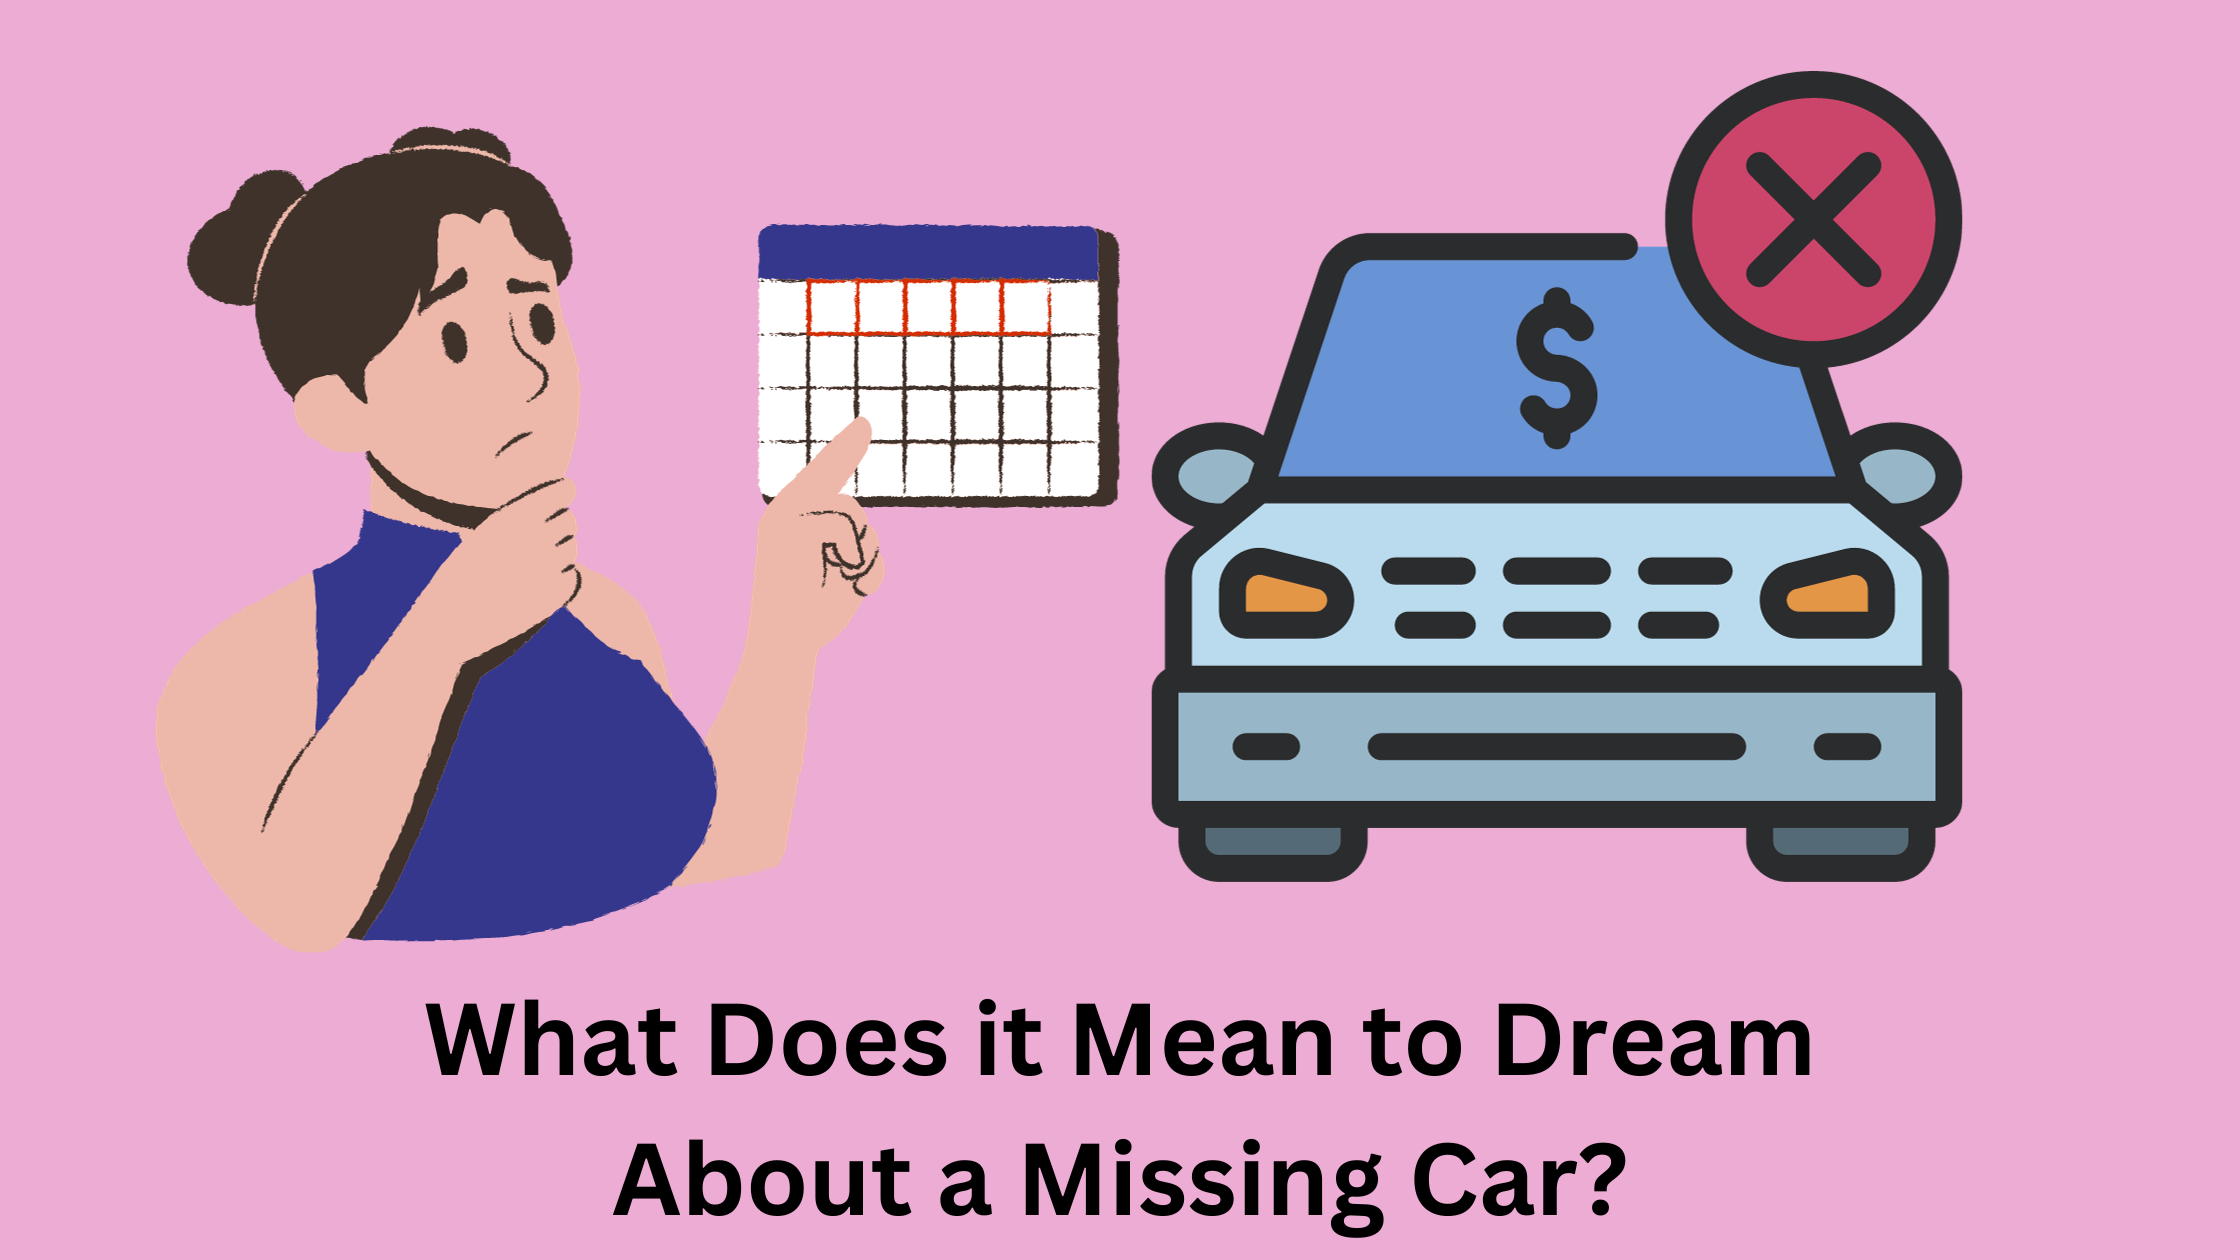 What Does it Mean to Dream About a Missing Car